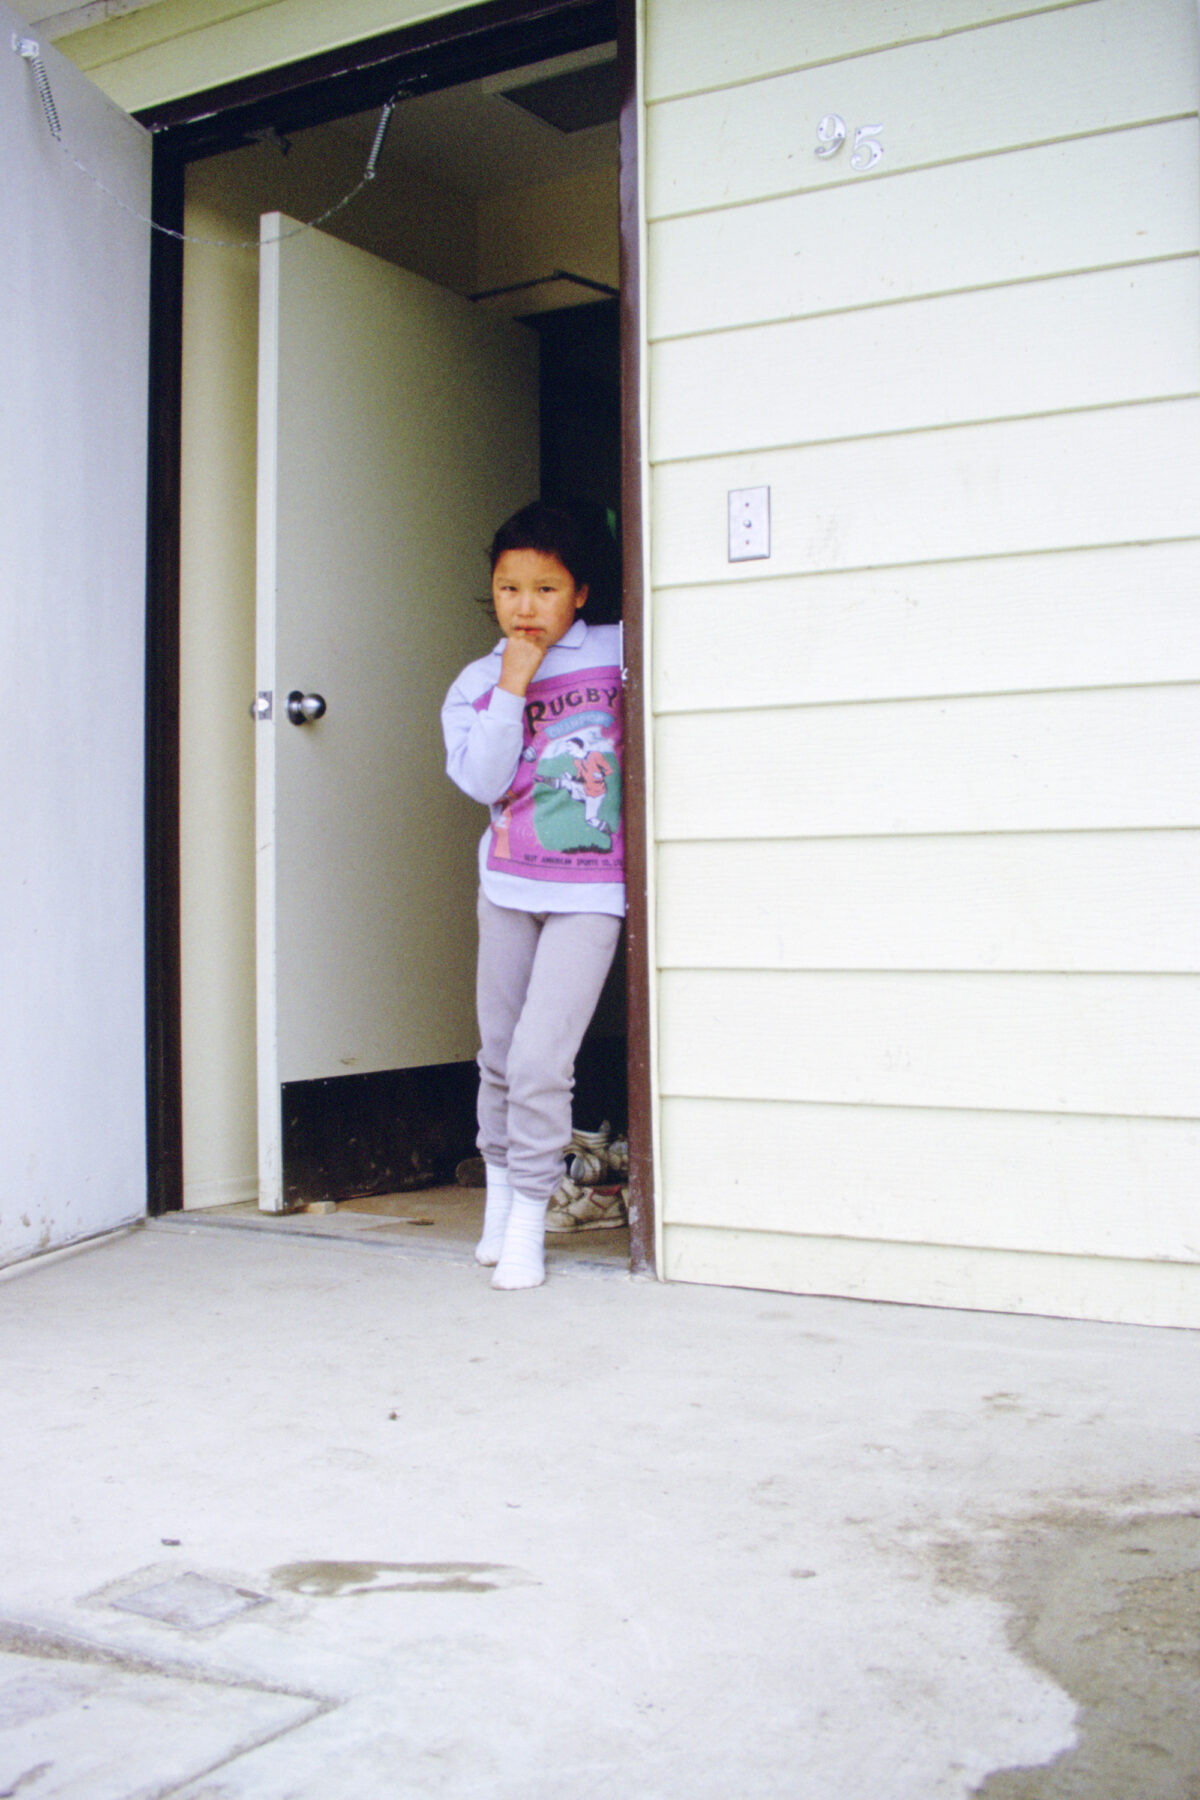 A child in a "rugby" sweatshirt standing in a doorway.